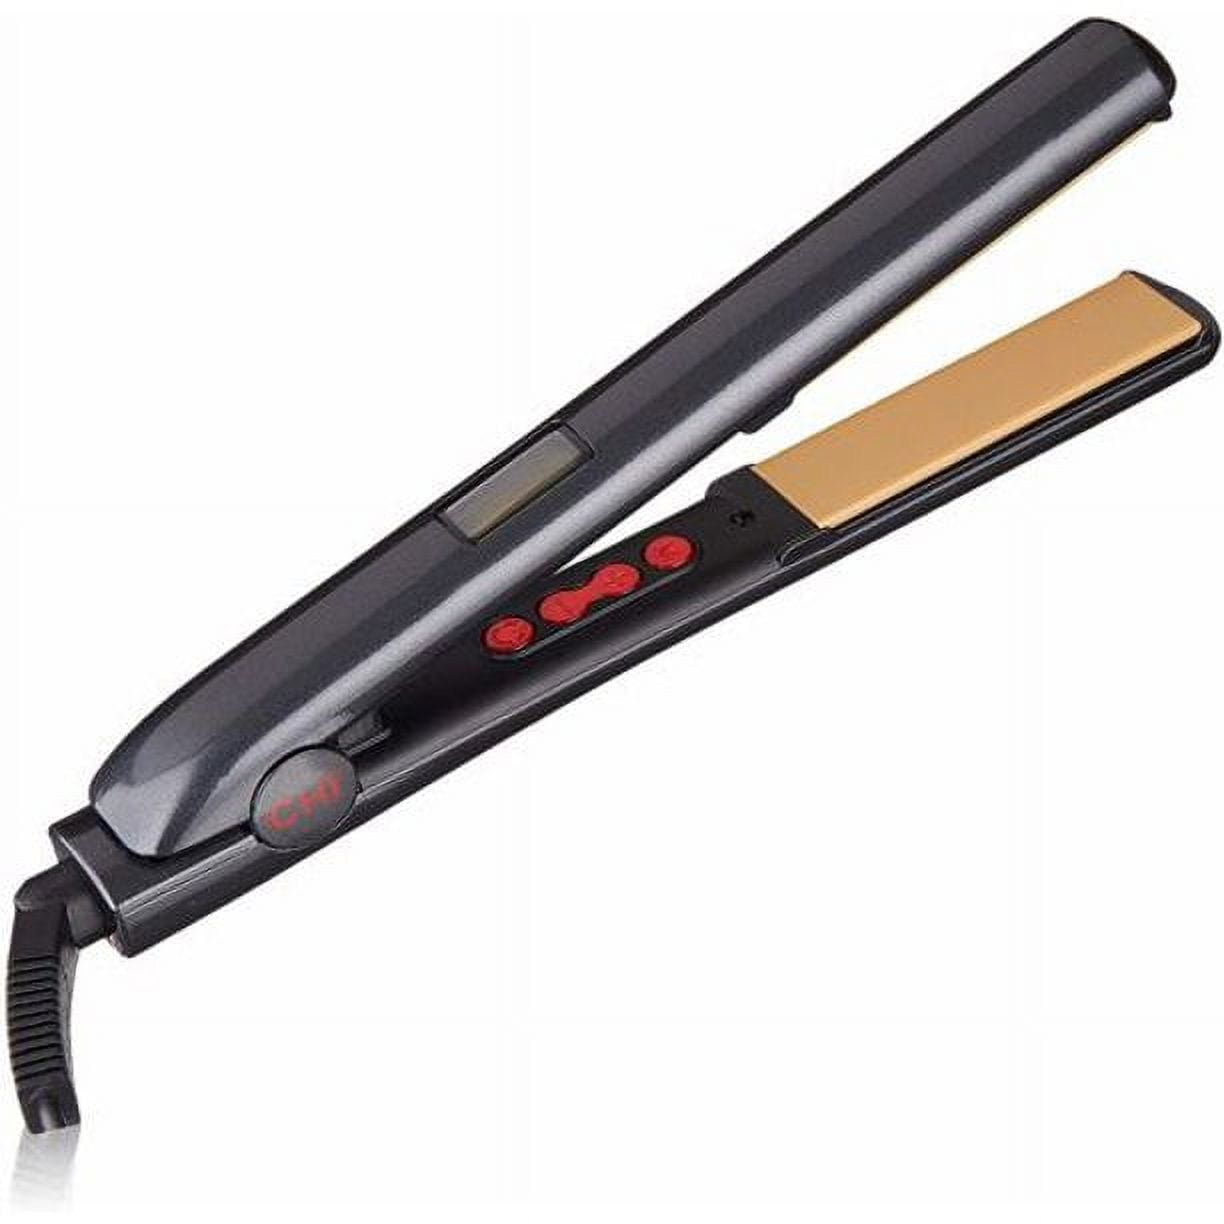 Buy CHI Tech Professional 1 Inch Ceramic Hairstyling Iron Dual Voltage, 1  Lb. Online at Low Prices in India - Amazon.in